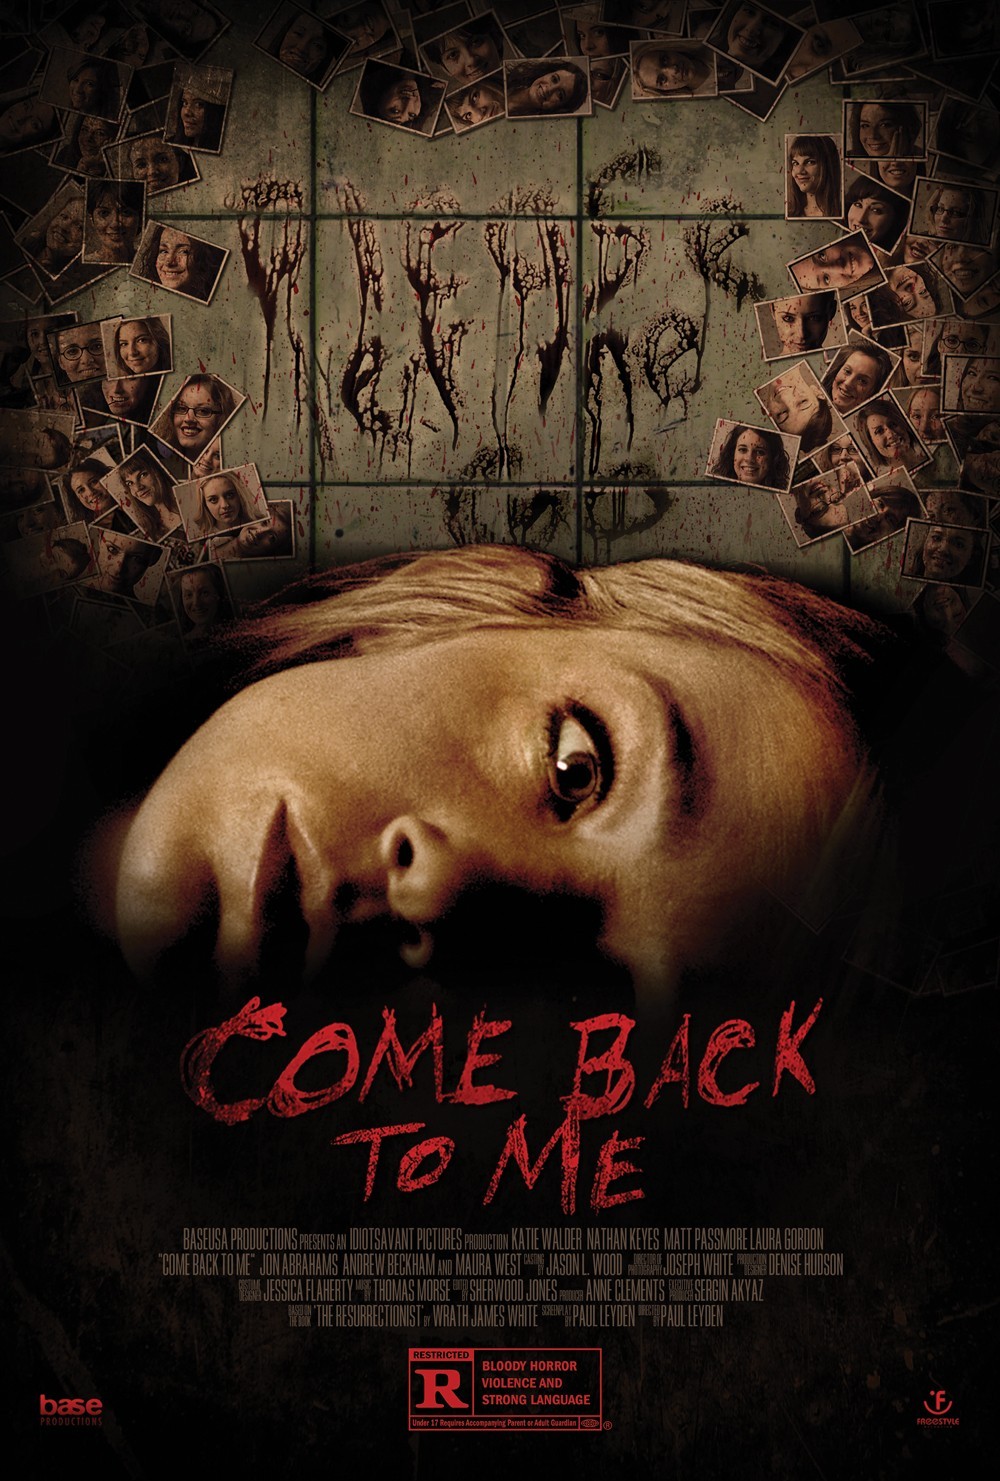 Poster of Freestyle Releasing's Come Back to Me (2014)